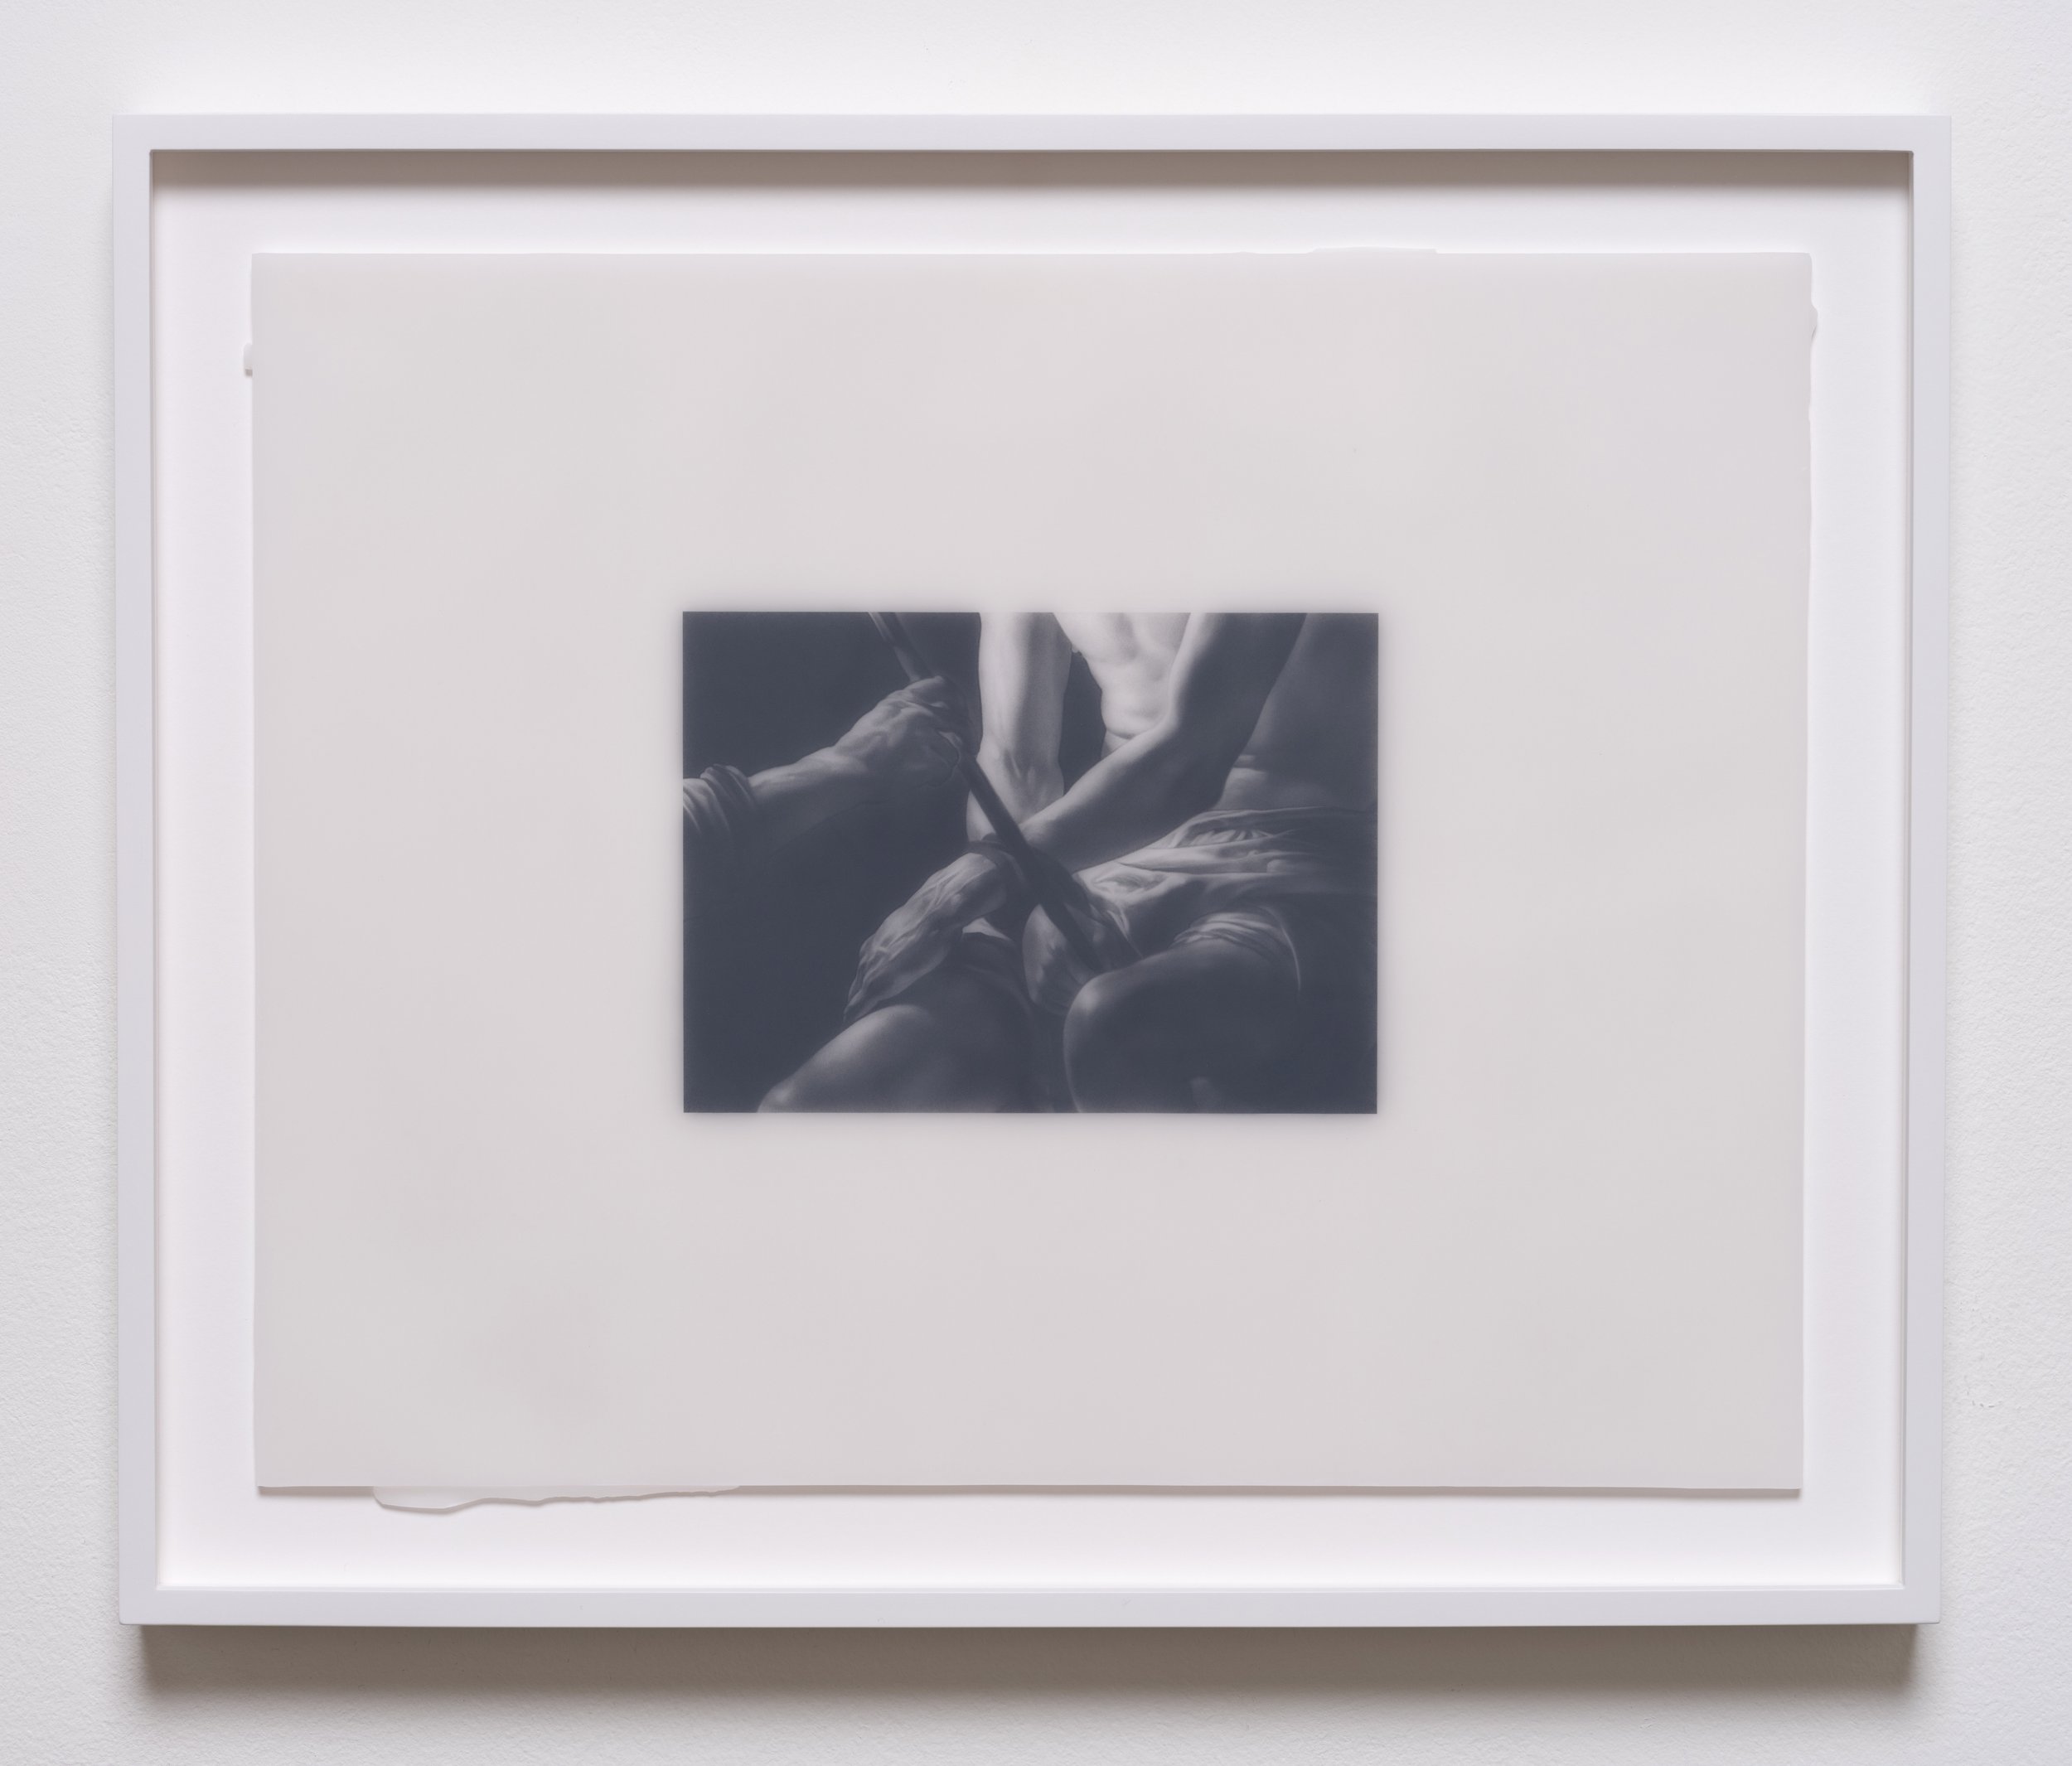   GvH.1617.175.2023 , 2023 Graphite, wax, and drafting film 16 x 19 1/4 x 1 1/2 inches (framed) 